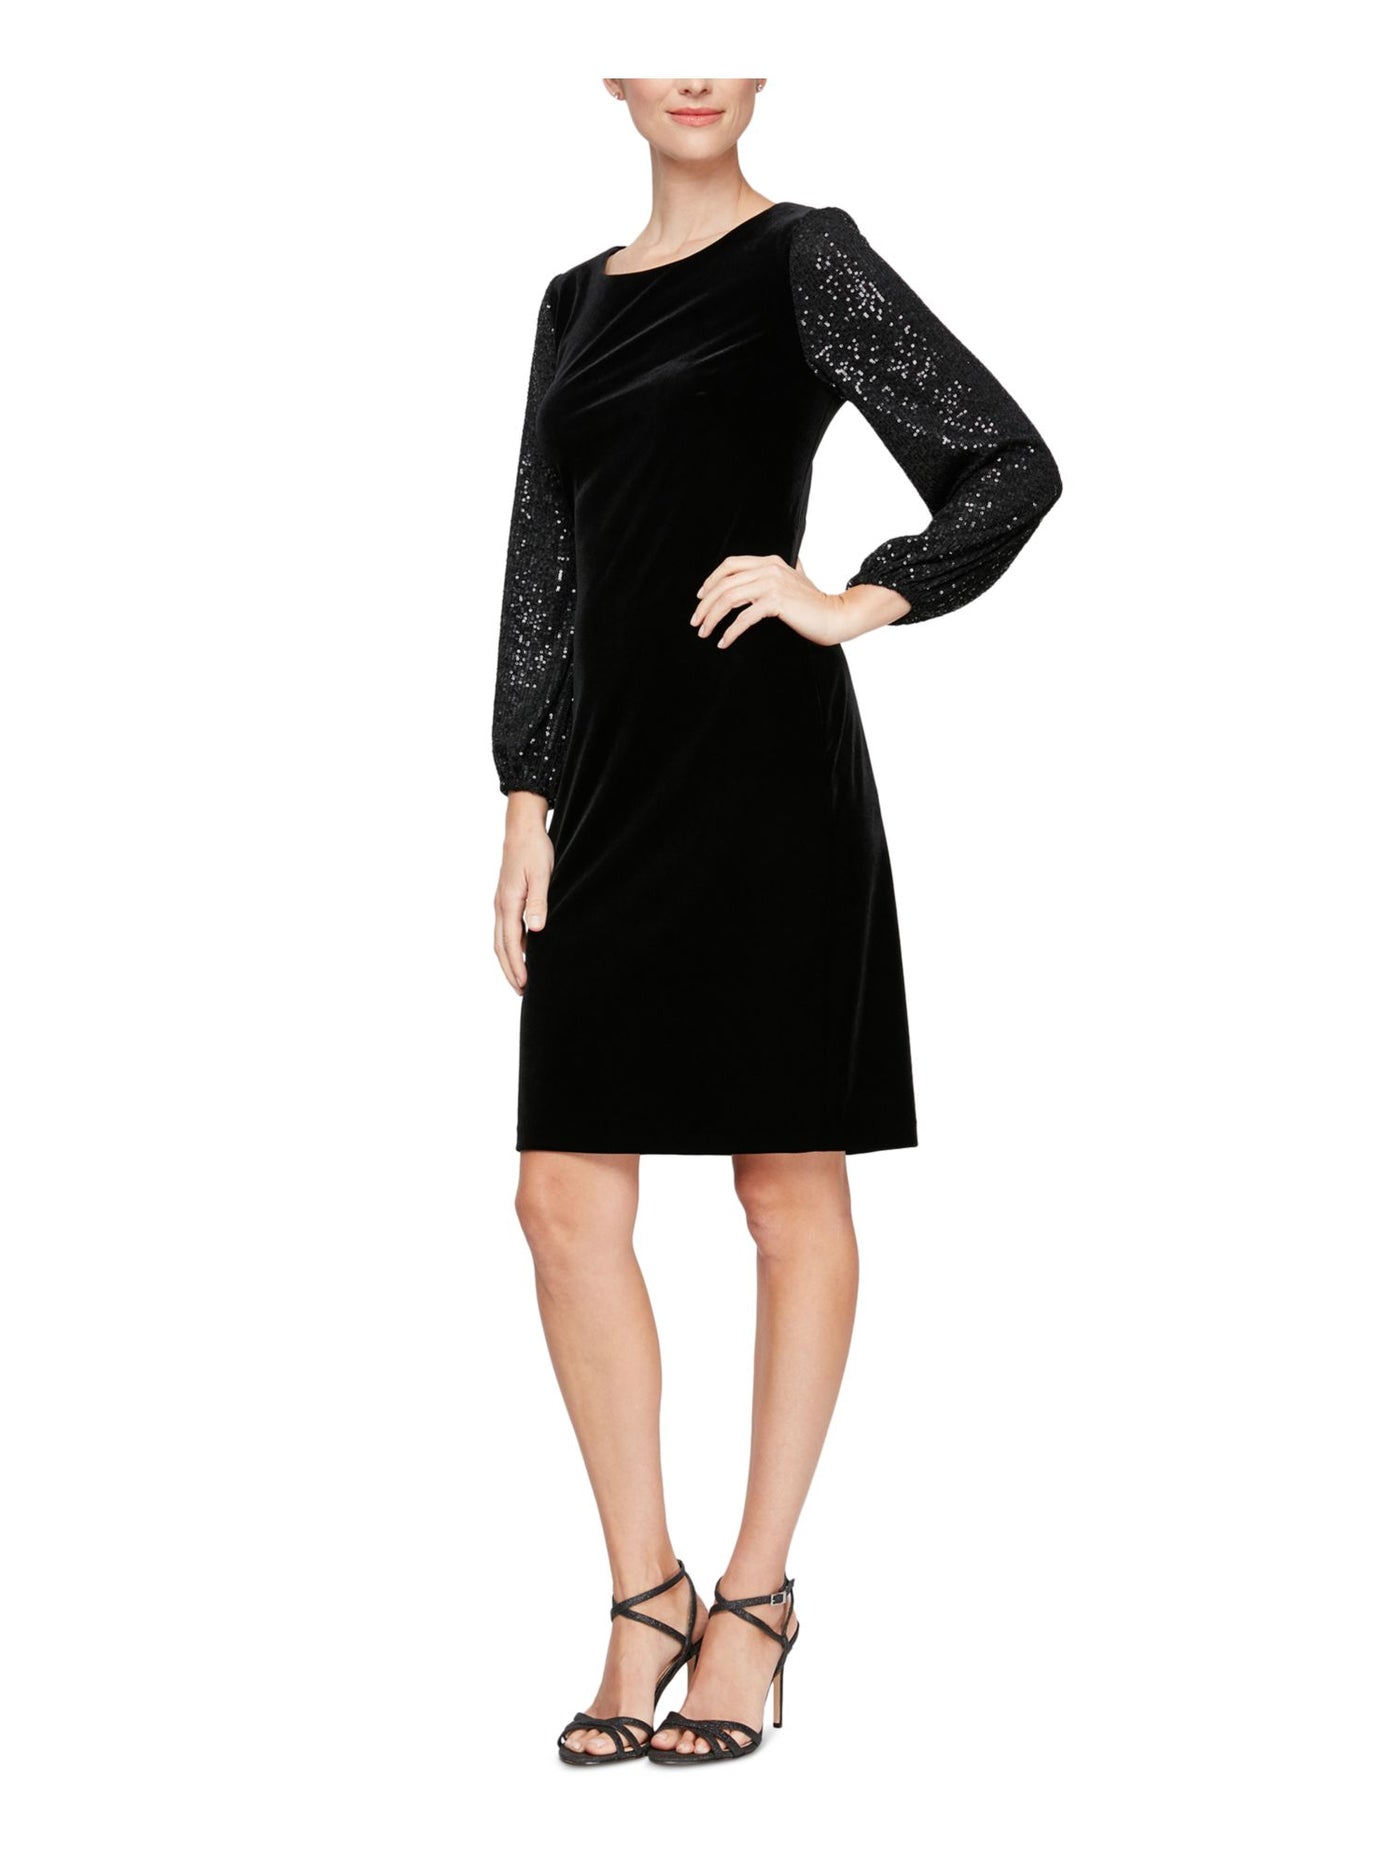 ALEX EVENINGS Womens Black Stretch Sequined Zippered Elastic Cuffs Blouson Sleeve Scoop Neck Above The Knee Party Sheath Dress 6